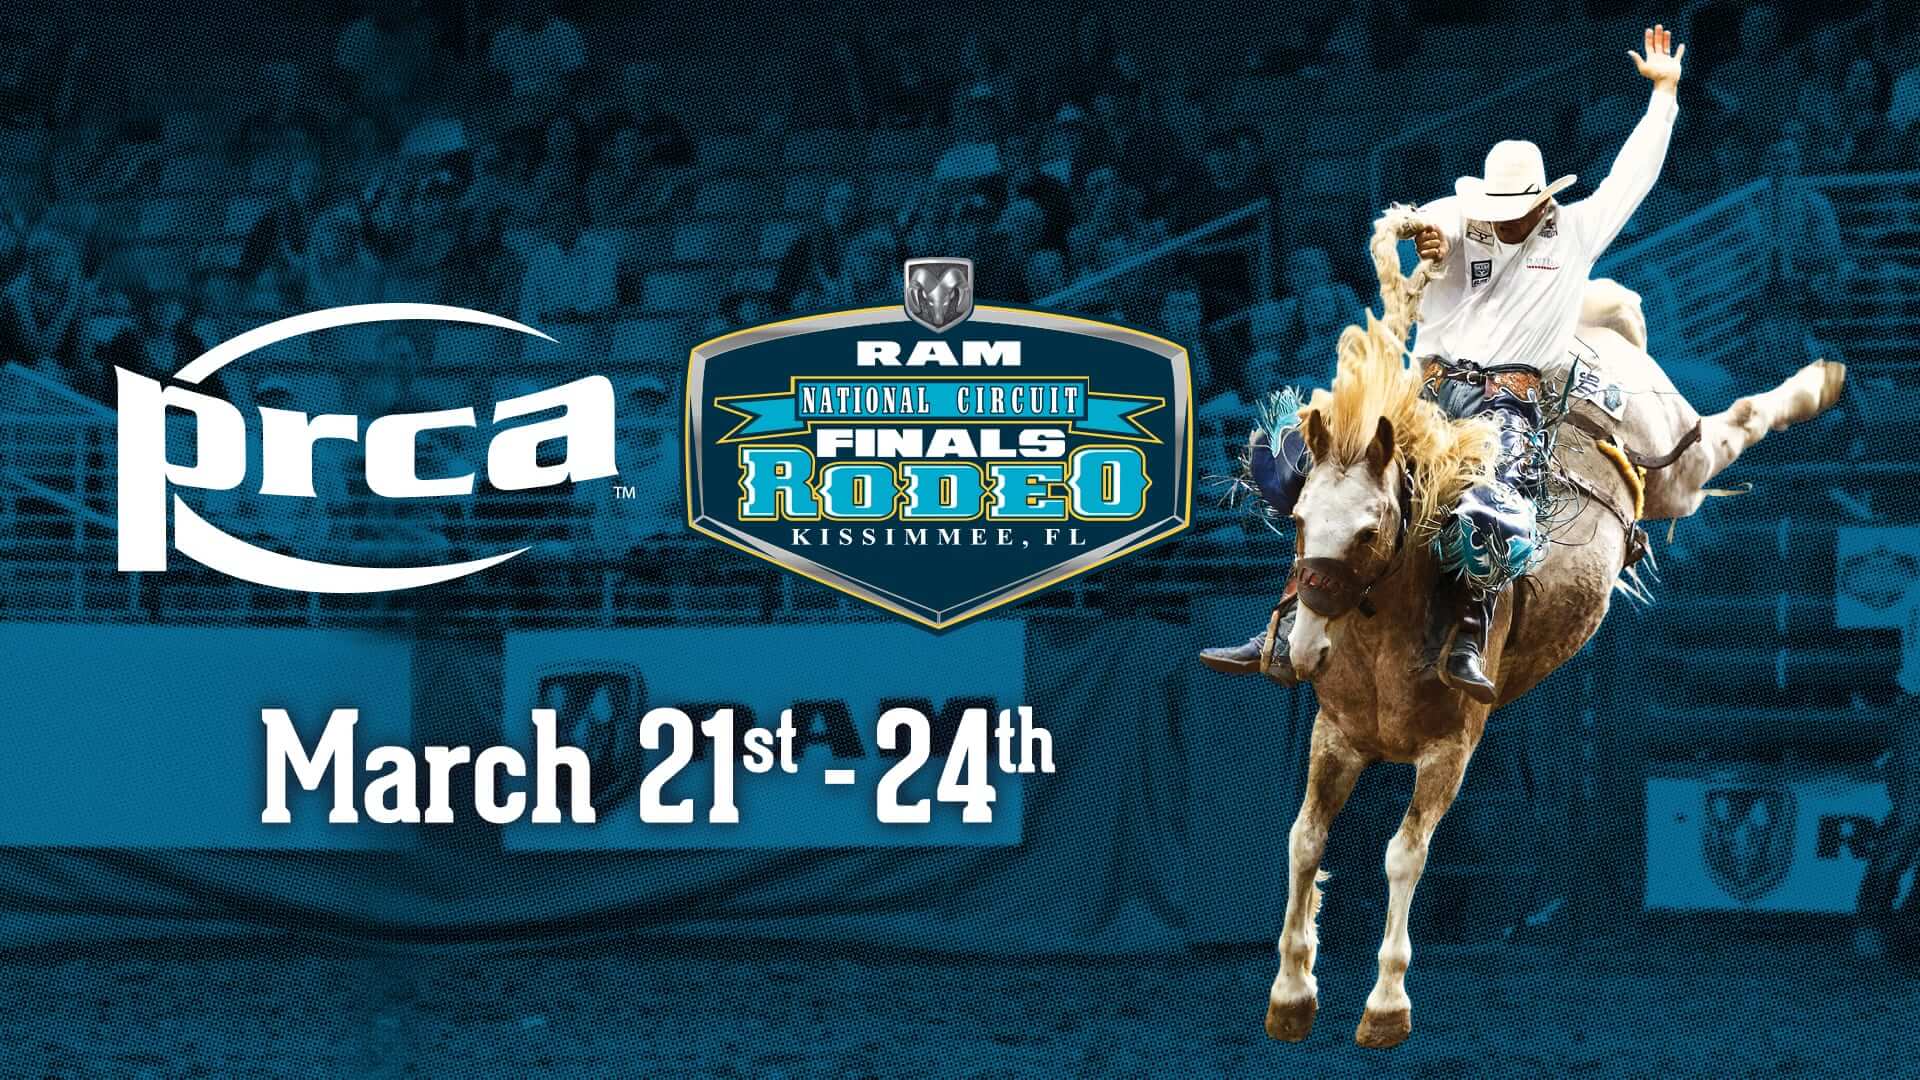 RAM National Circuit Finals Rodeo, 1/1 Go Country Events